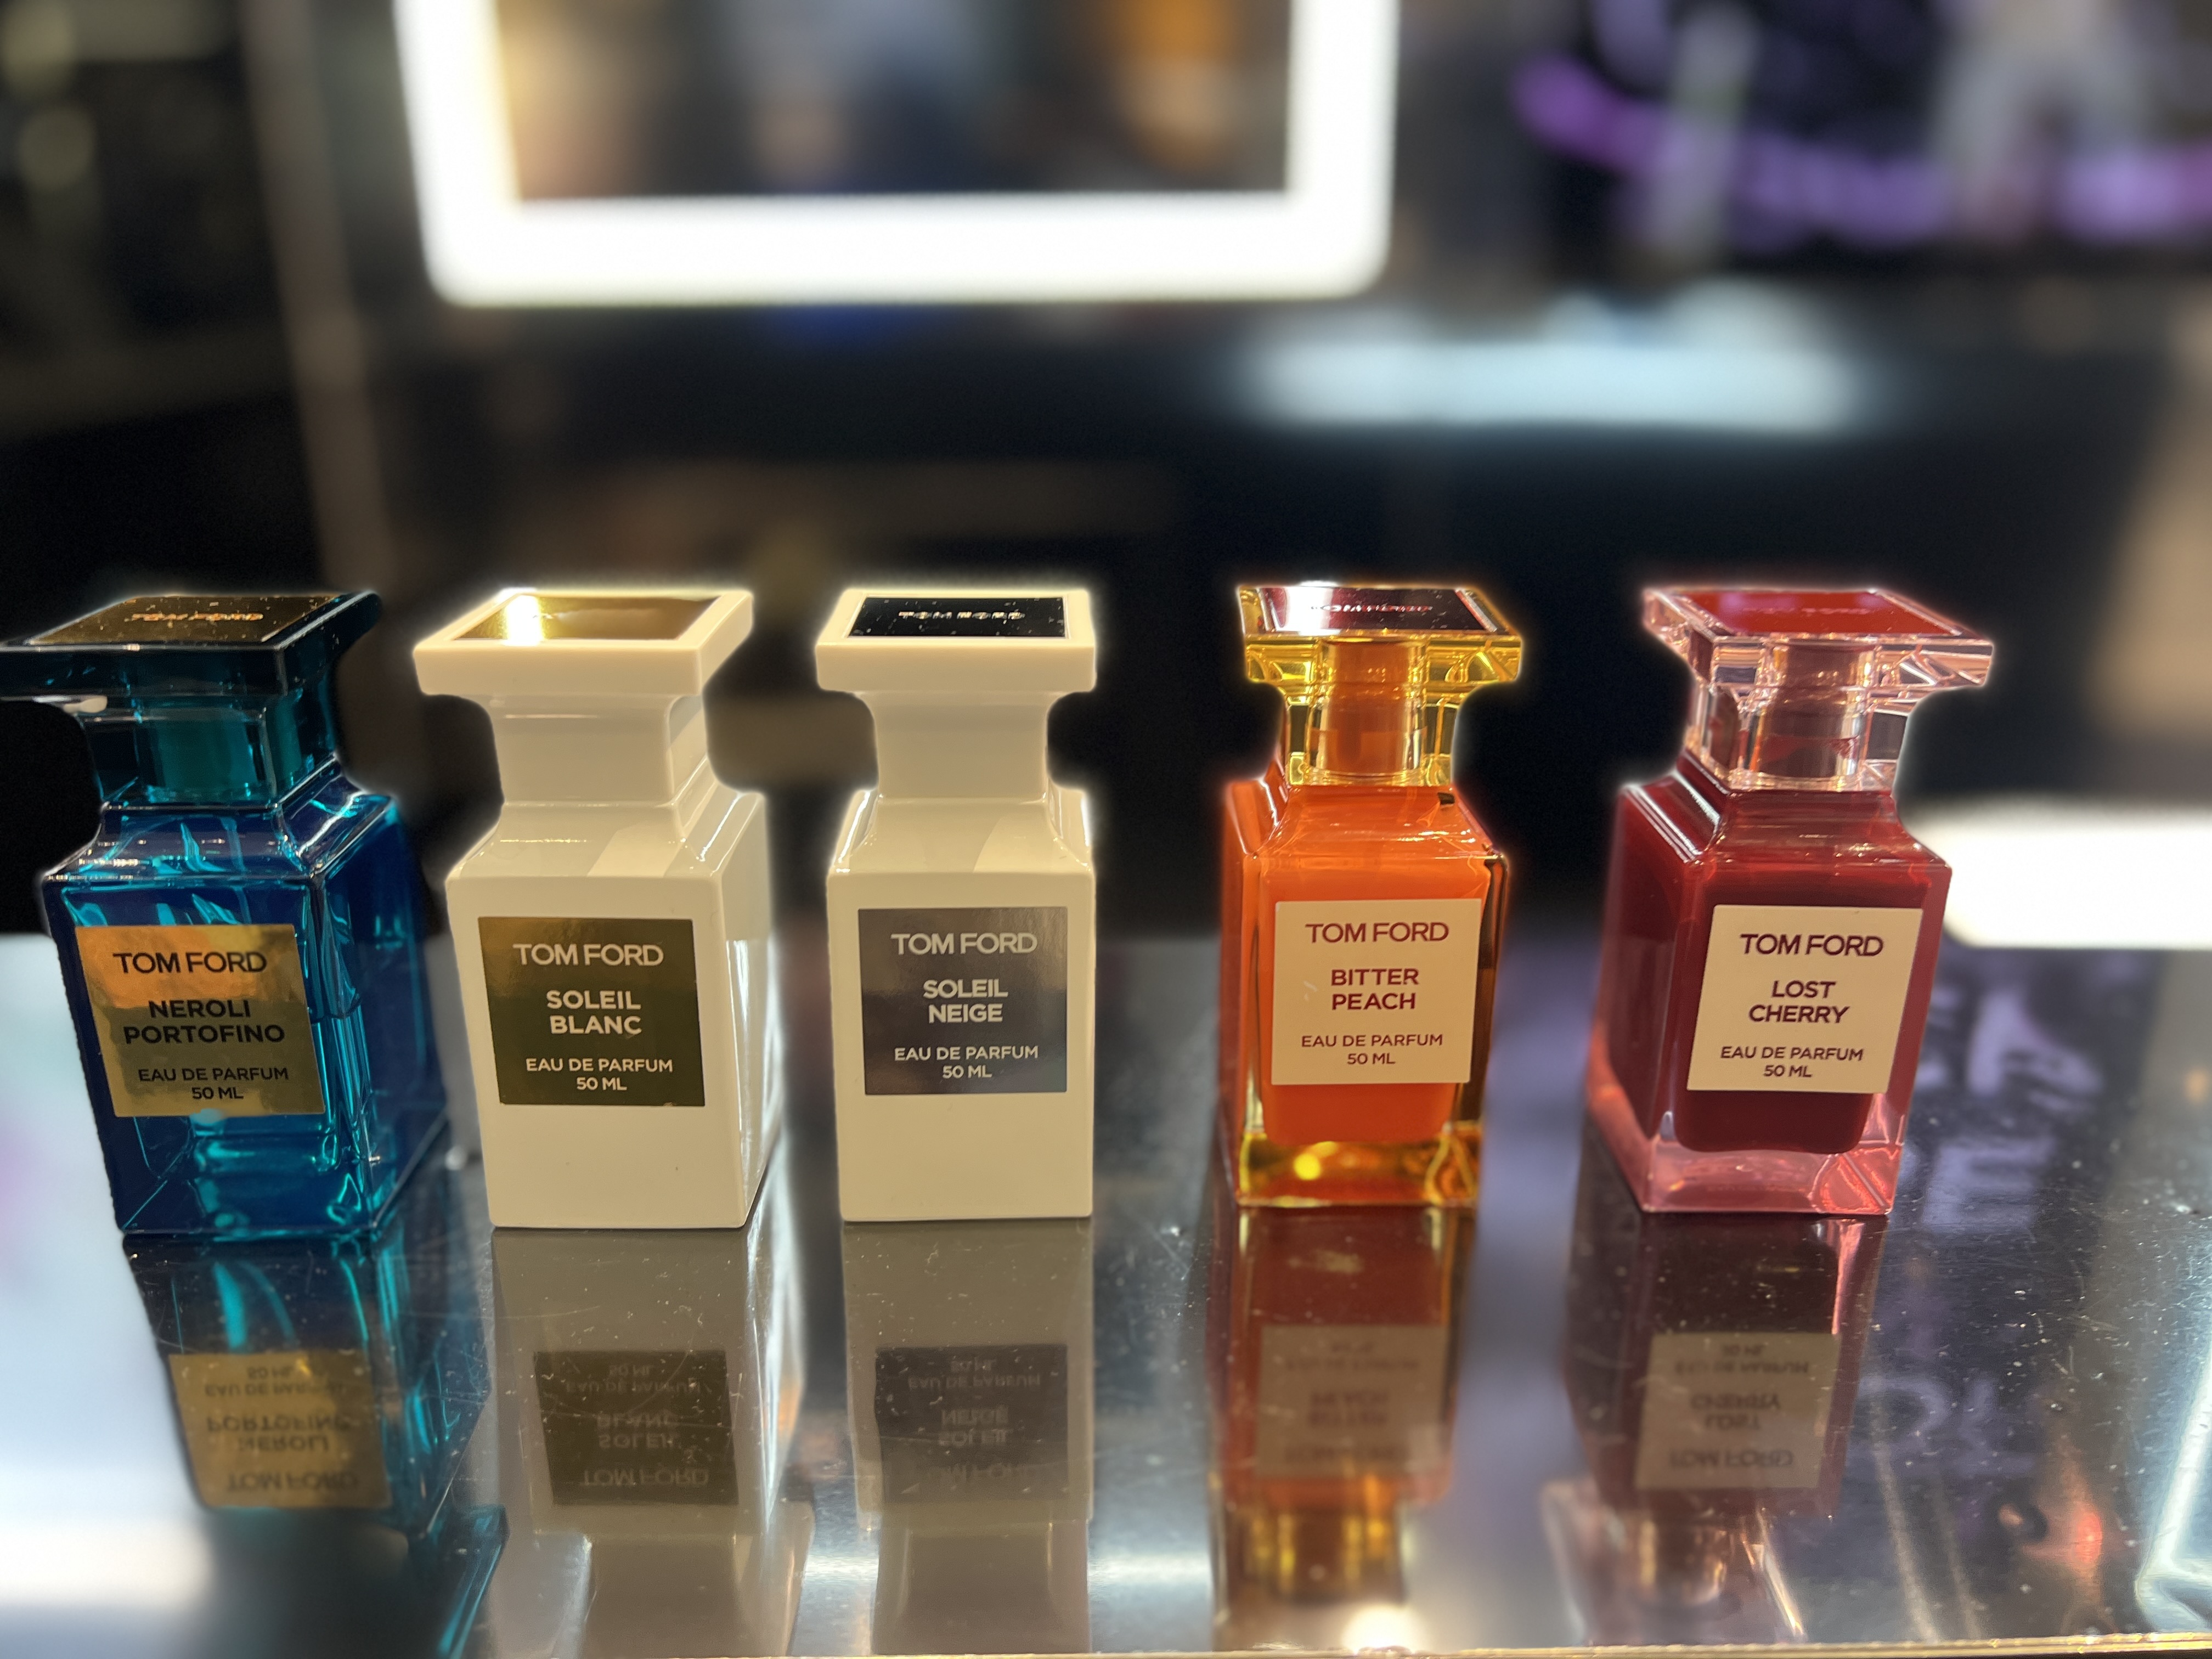 Tom Ford Parfum Display at Bloomingdales in NYC; Bloomingdale's offers a great weekend experience for unique shopping